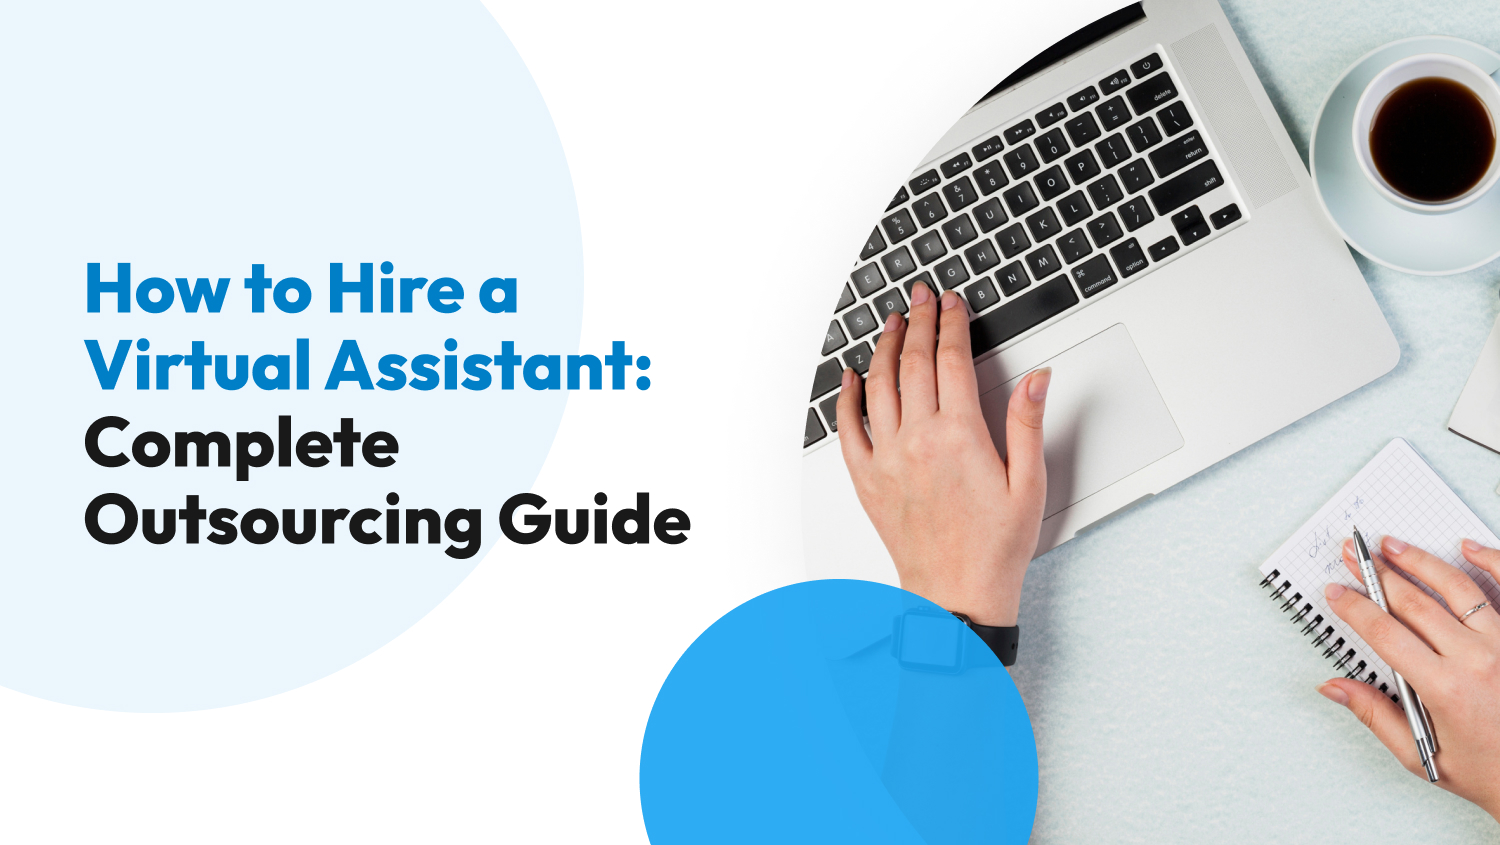 How to Hire a Virtual Assistant: Complete Outsourcing Guide